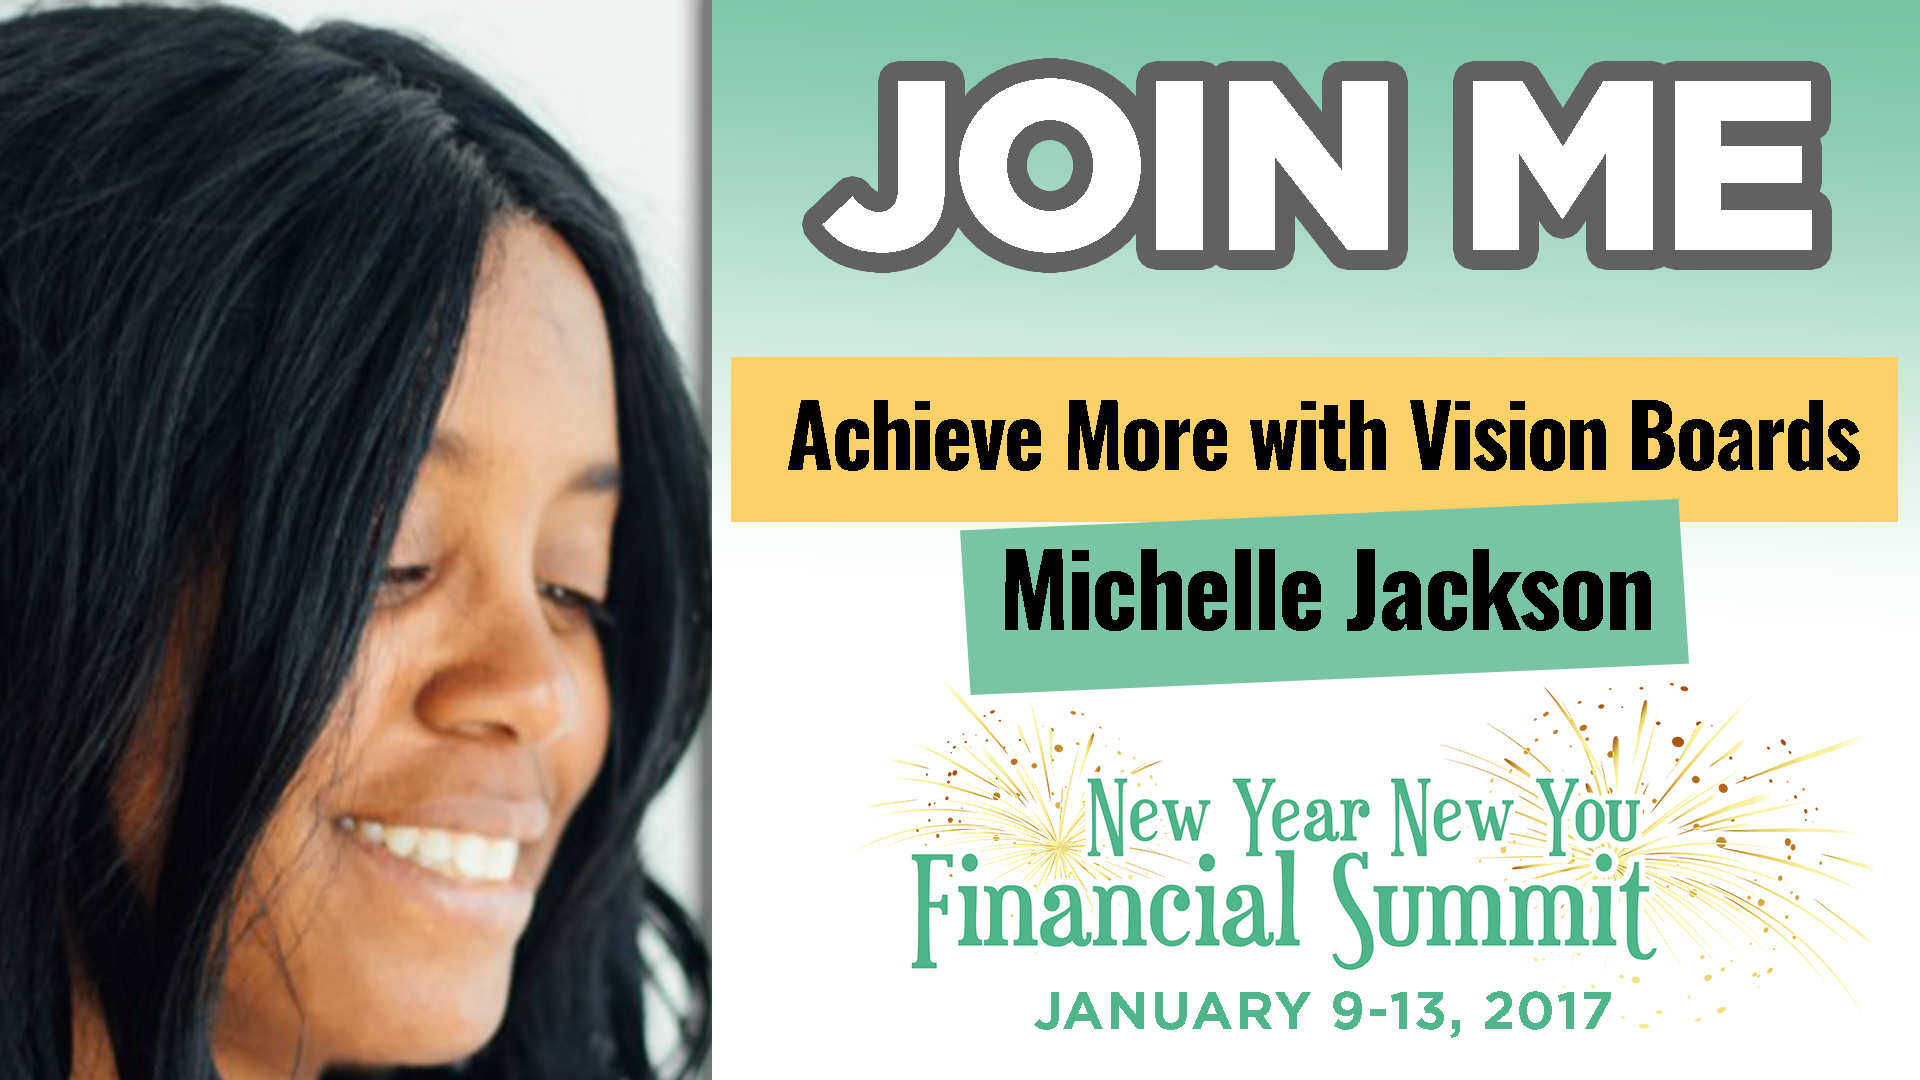 The New Year New You Financial Summit